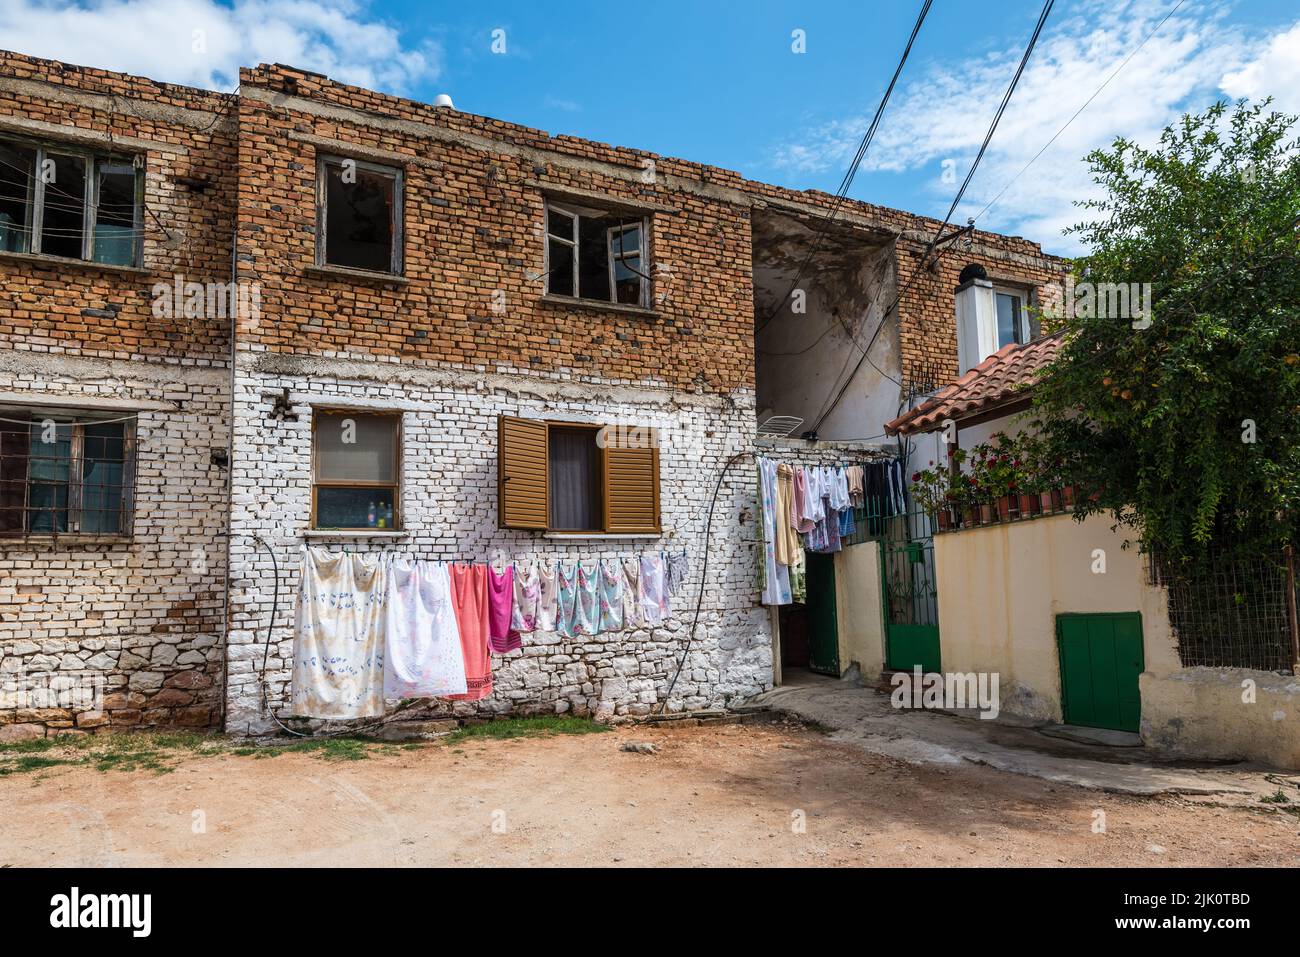 Ksamil, Albania - September 9, 2021: Street view of Ksamil at day with the old house in a poor area. Laundry is dried on a rope outside. Stock Photo